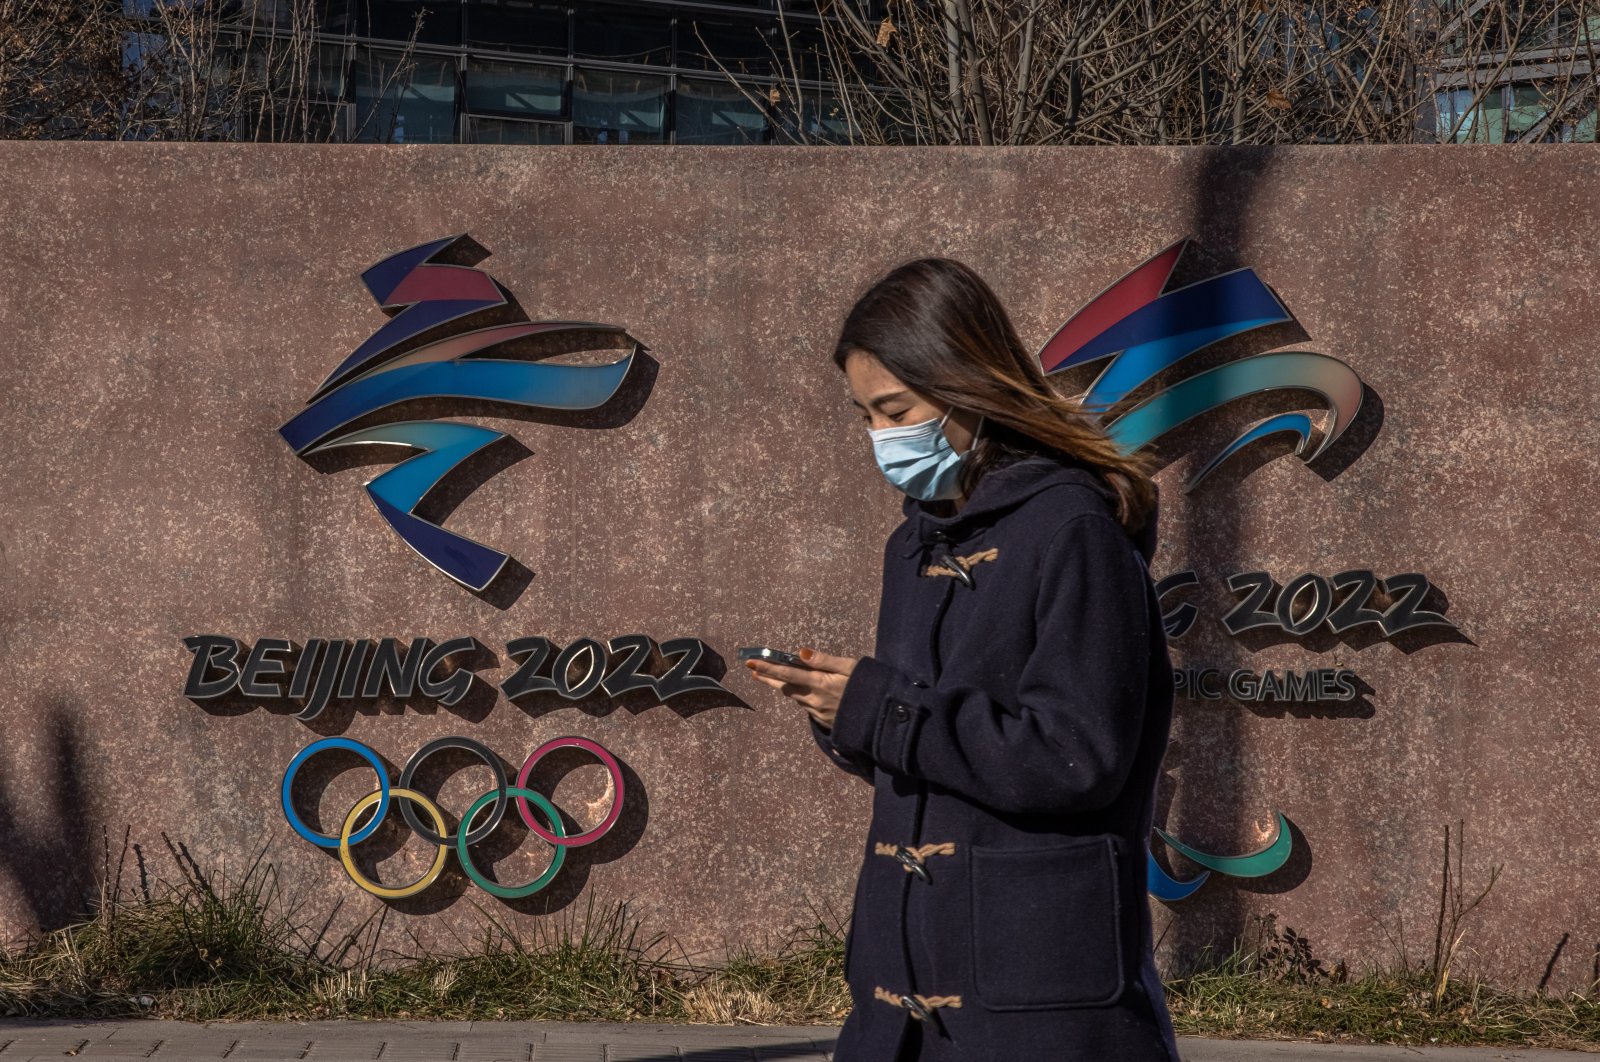 A woman wearing a face mask walks past the 2022 Beijing Winter Olympic and Paralympic emblems in Beijing, China, Dec. 1, 2021. (EPA Photo)